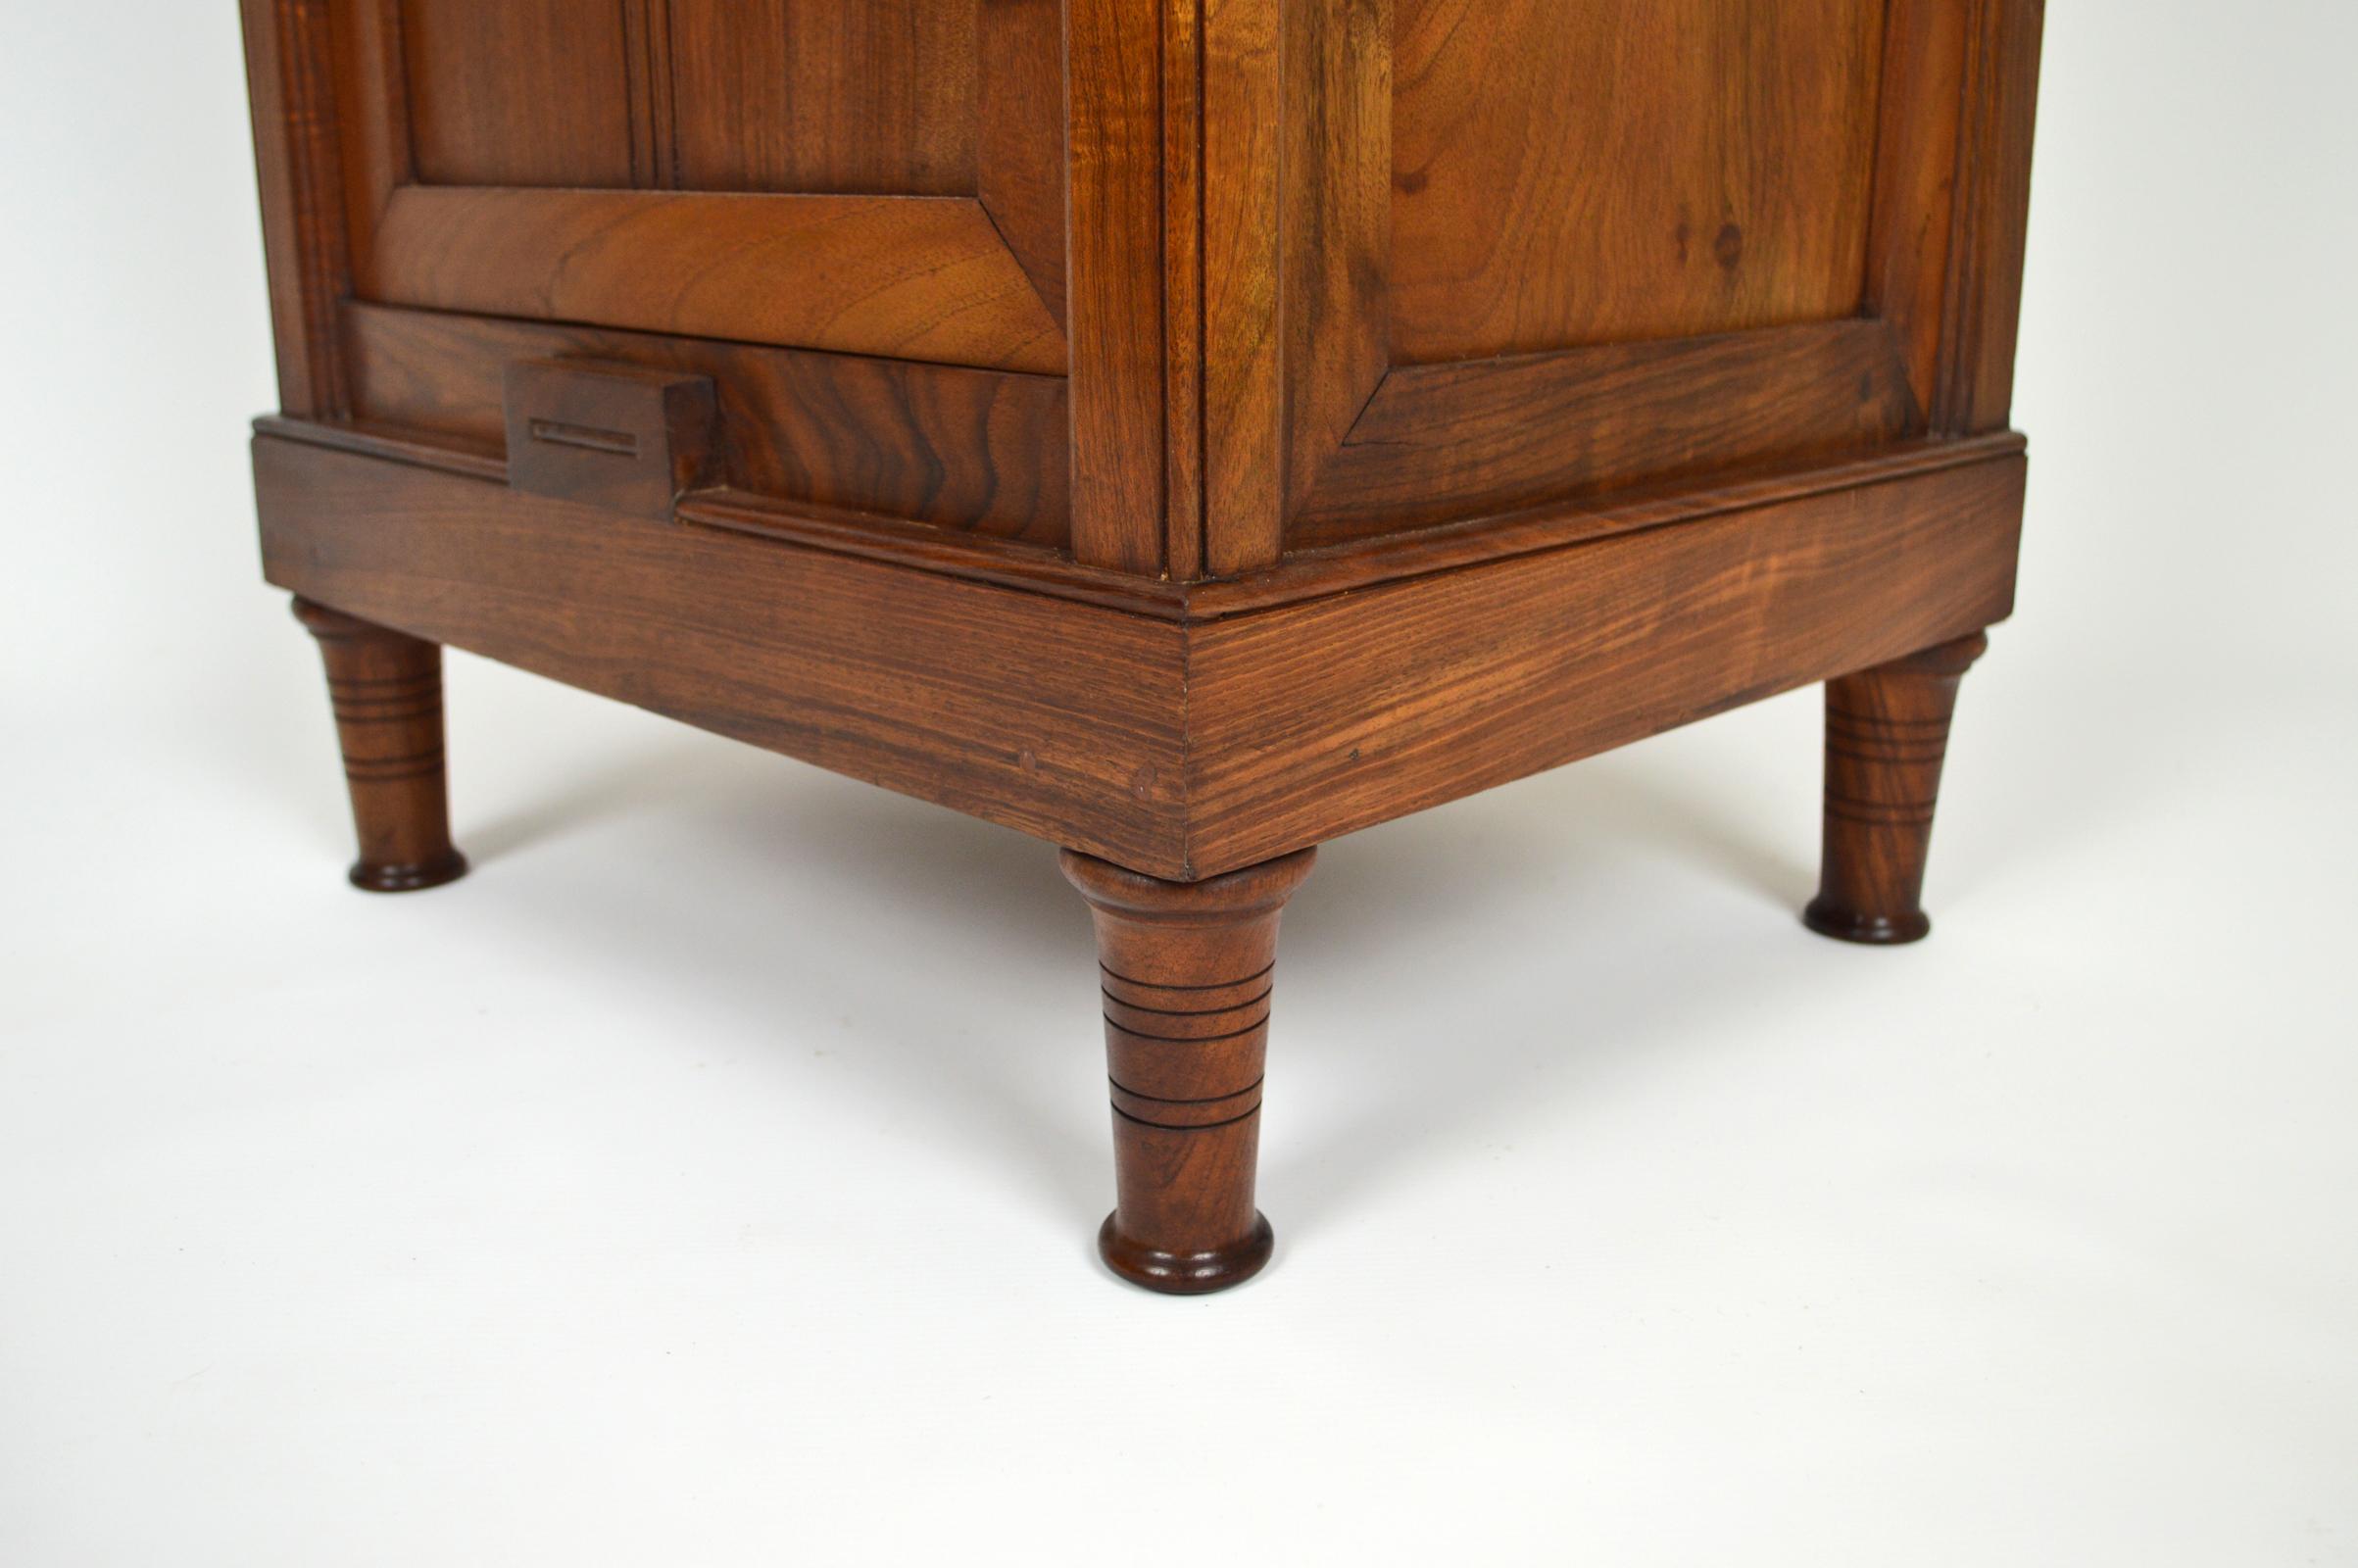 Art Nouveau Carved Walnut Nightstand / Bedside Table with Marble Top, circa 1900 For Sale 5